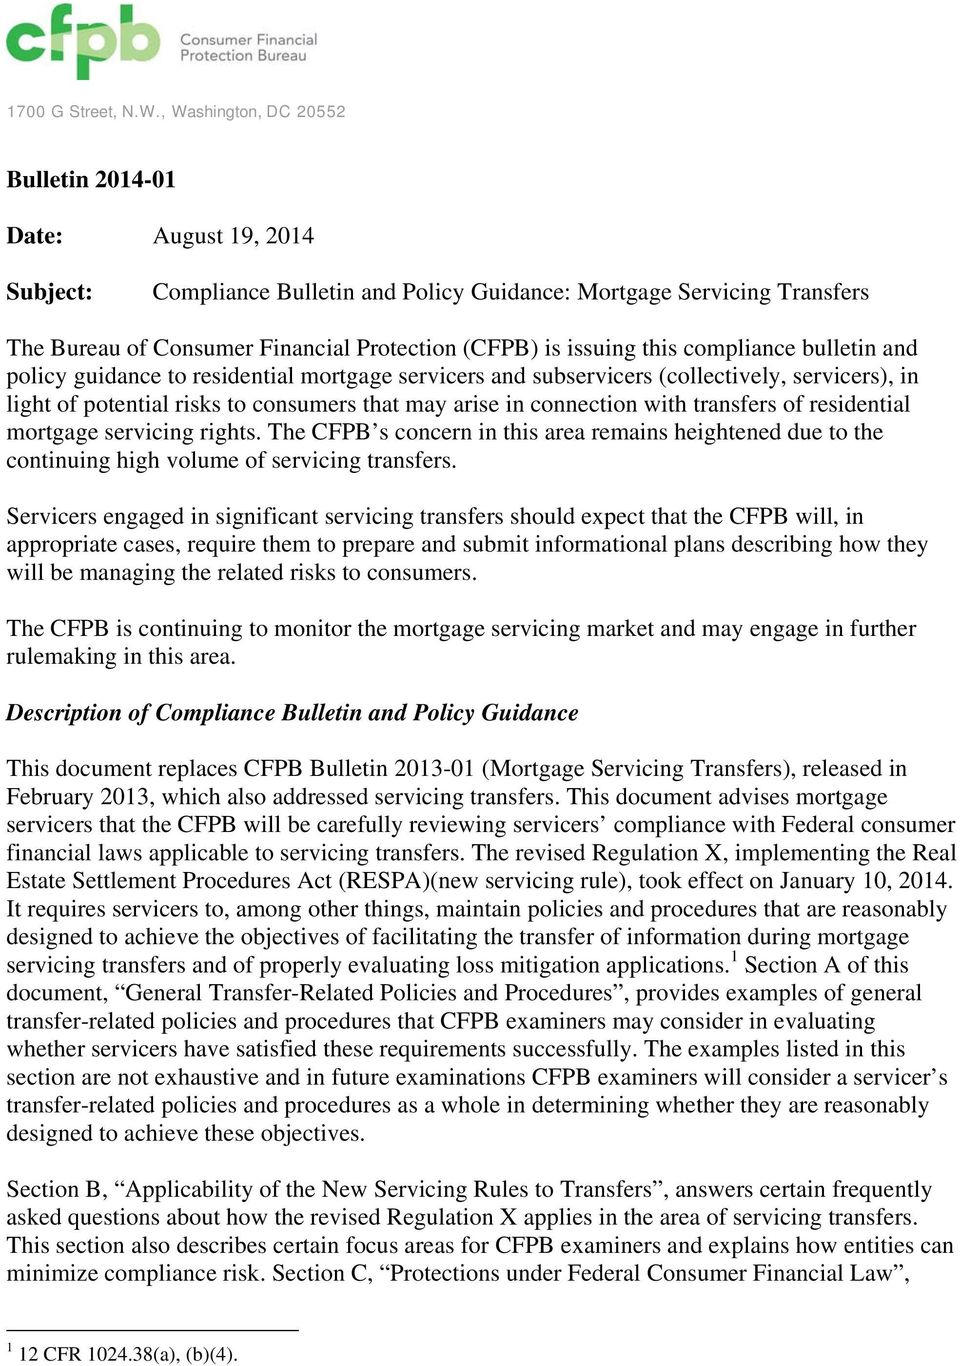 issuing this compliance bulletin and policy guidance to residential mortgage servicers and subservicers (collectively, servicers), in light of potential risks to consumers that may arise in